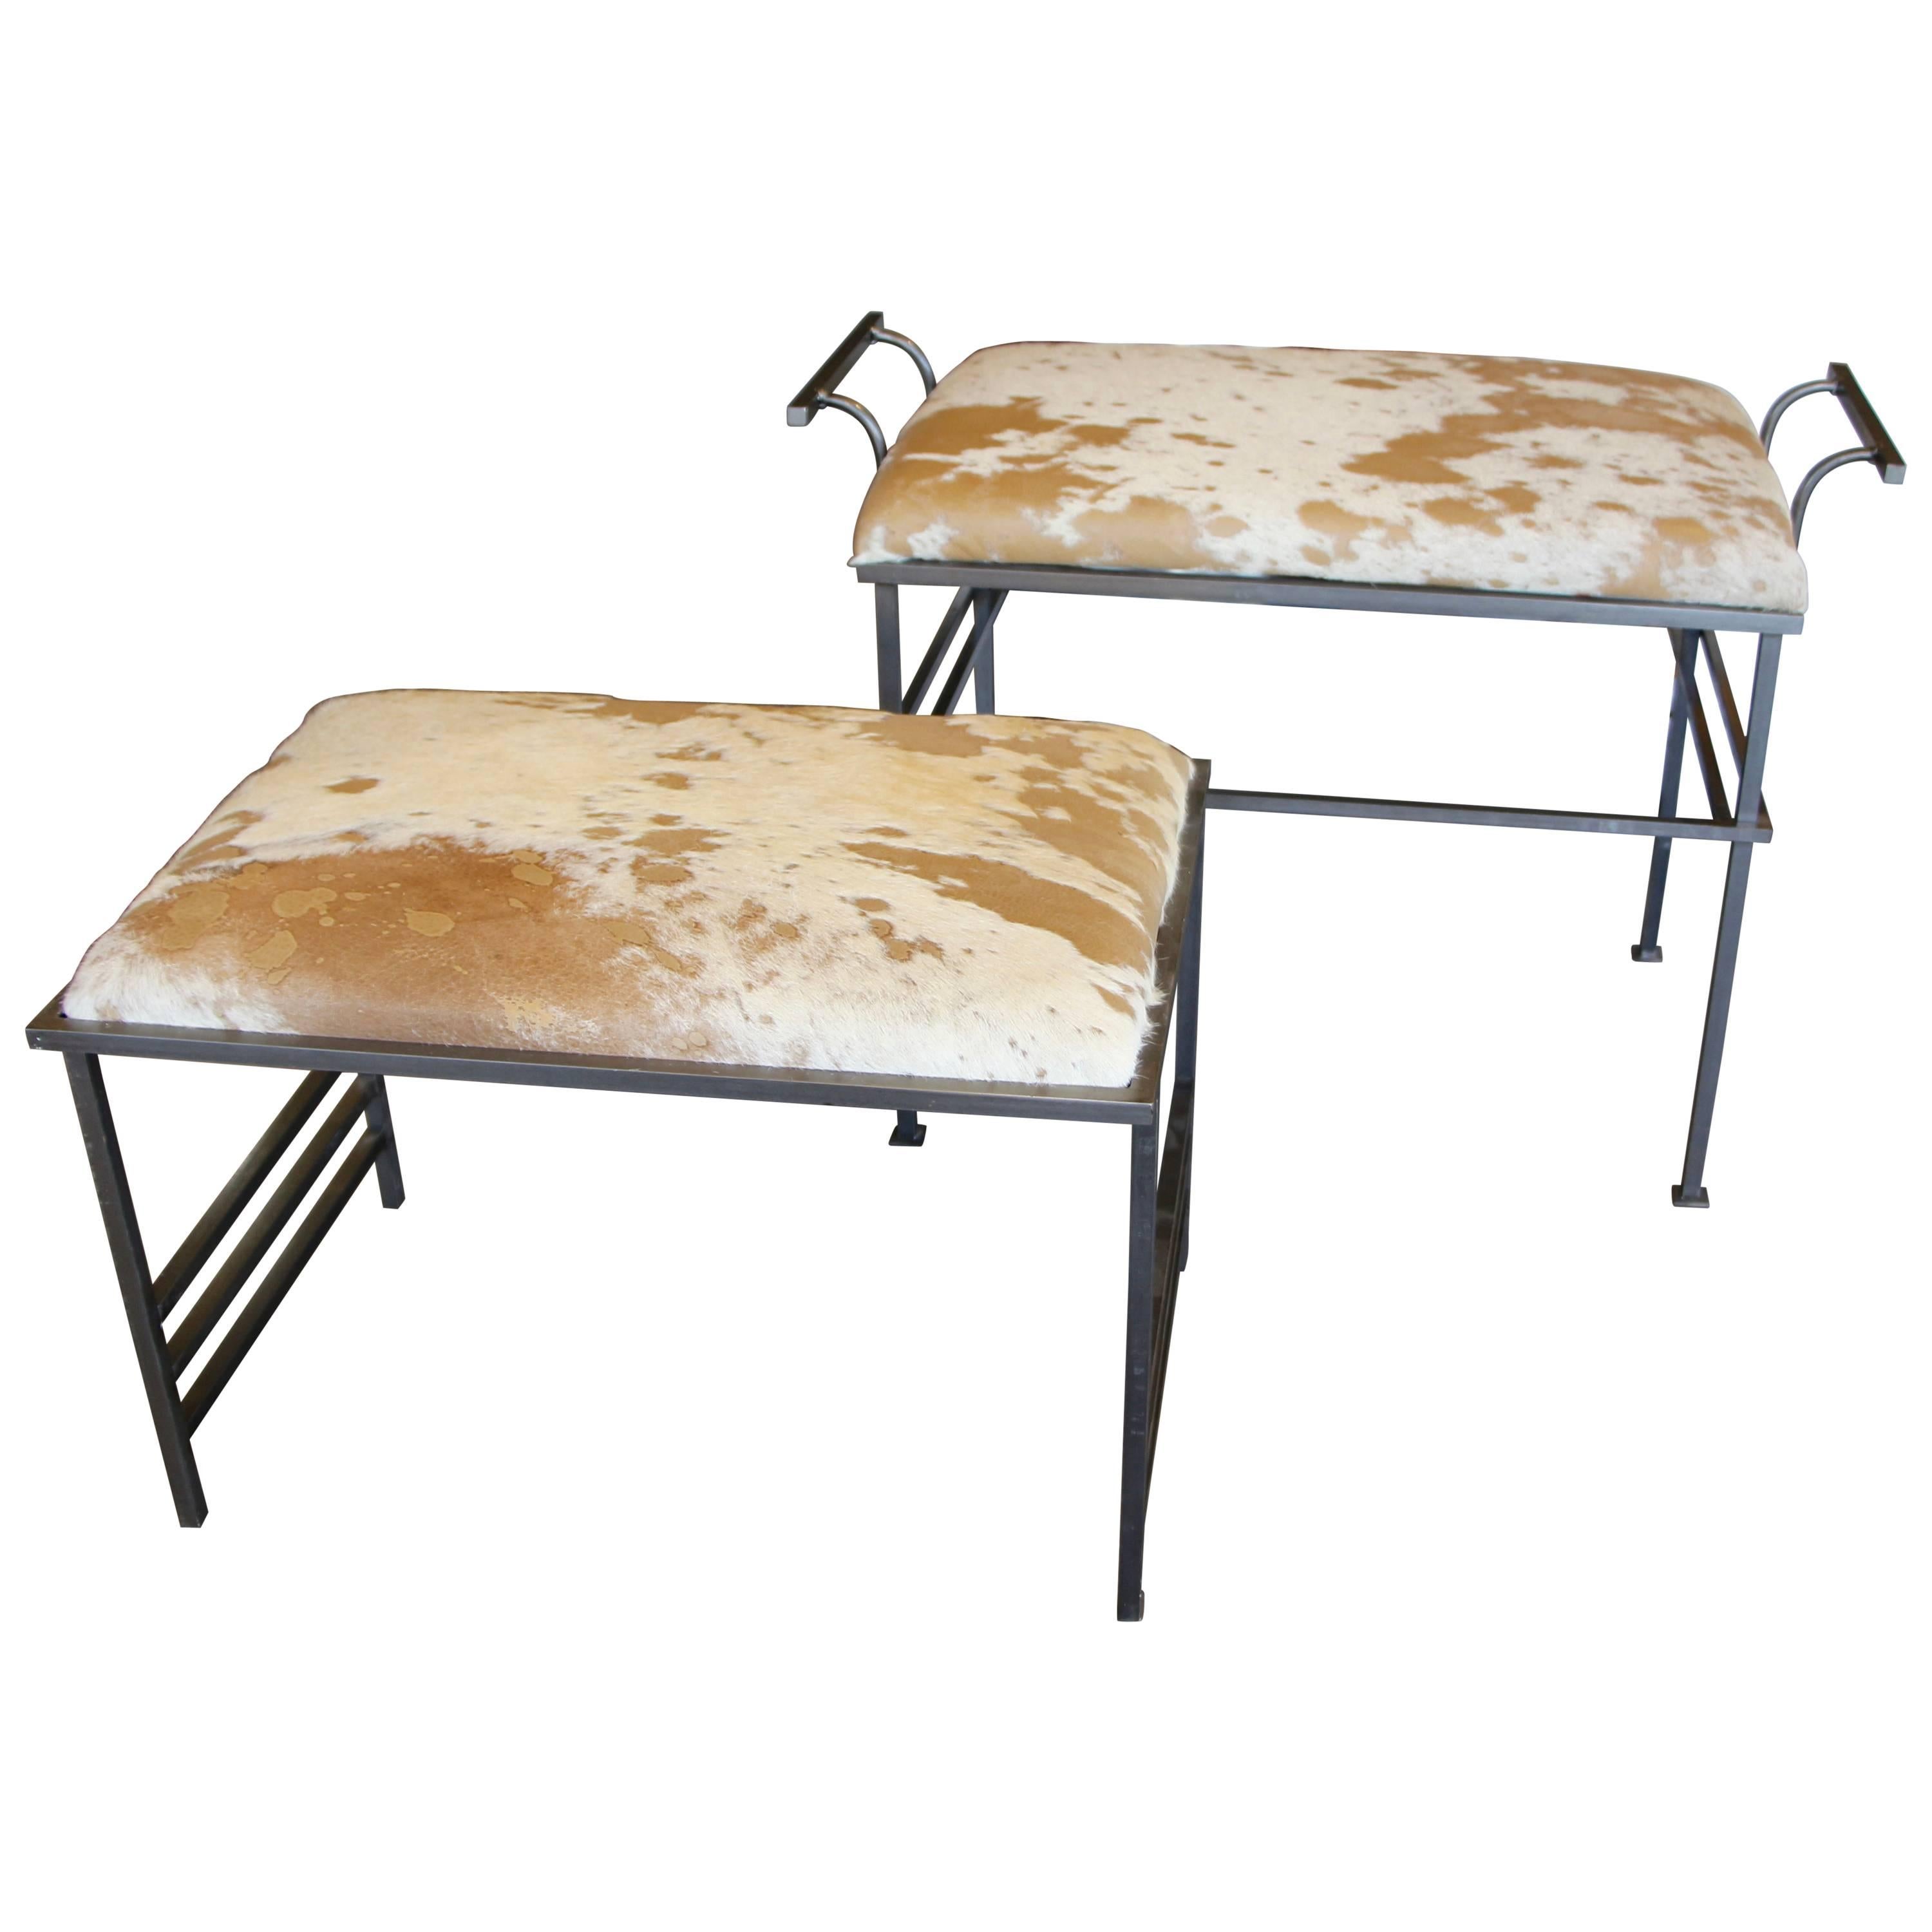 Great Steel Benches with Debrided Hide Seats